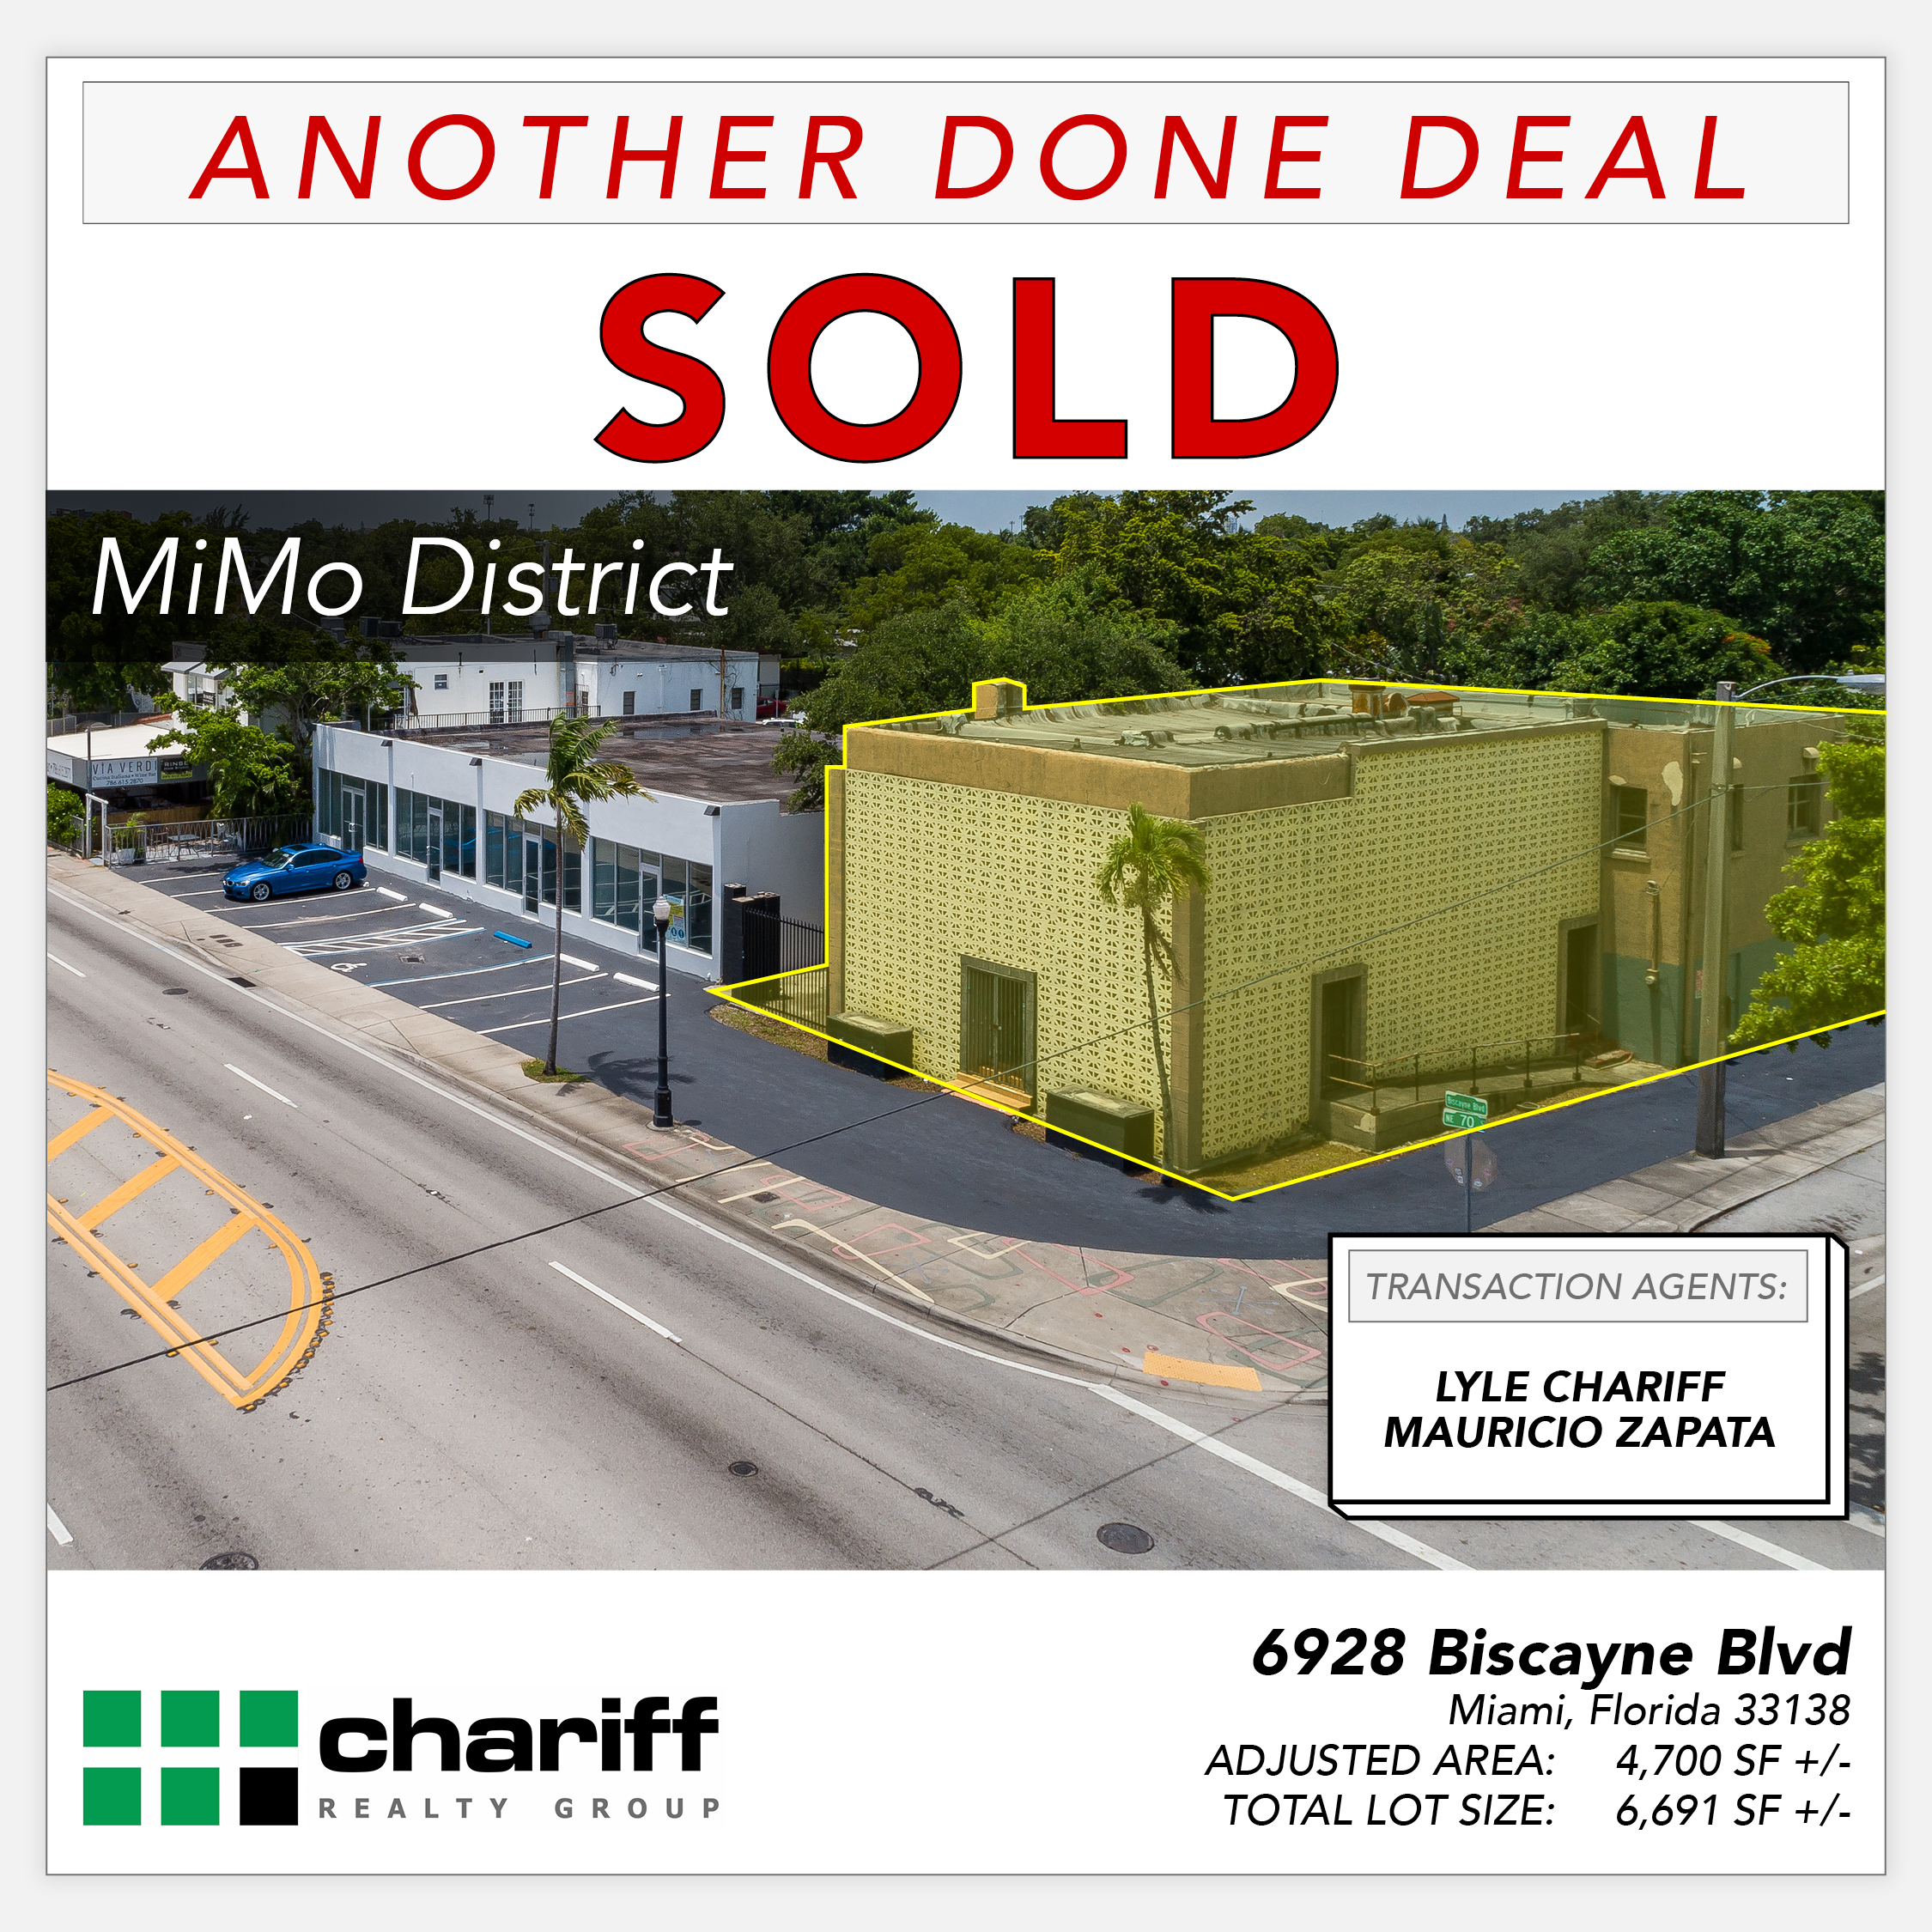 6928 Biscayne Blvd - Another Done Deal-Sold-MiMo District - Miami-Florida -33138 -Chariff Realty Group